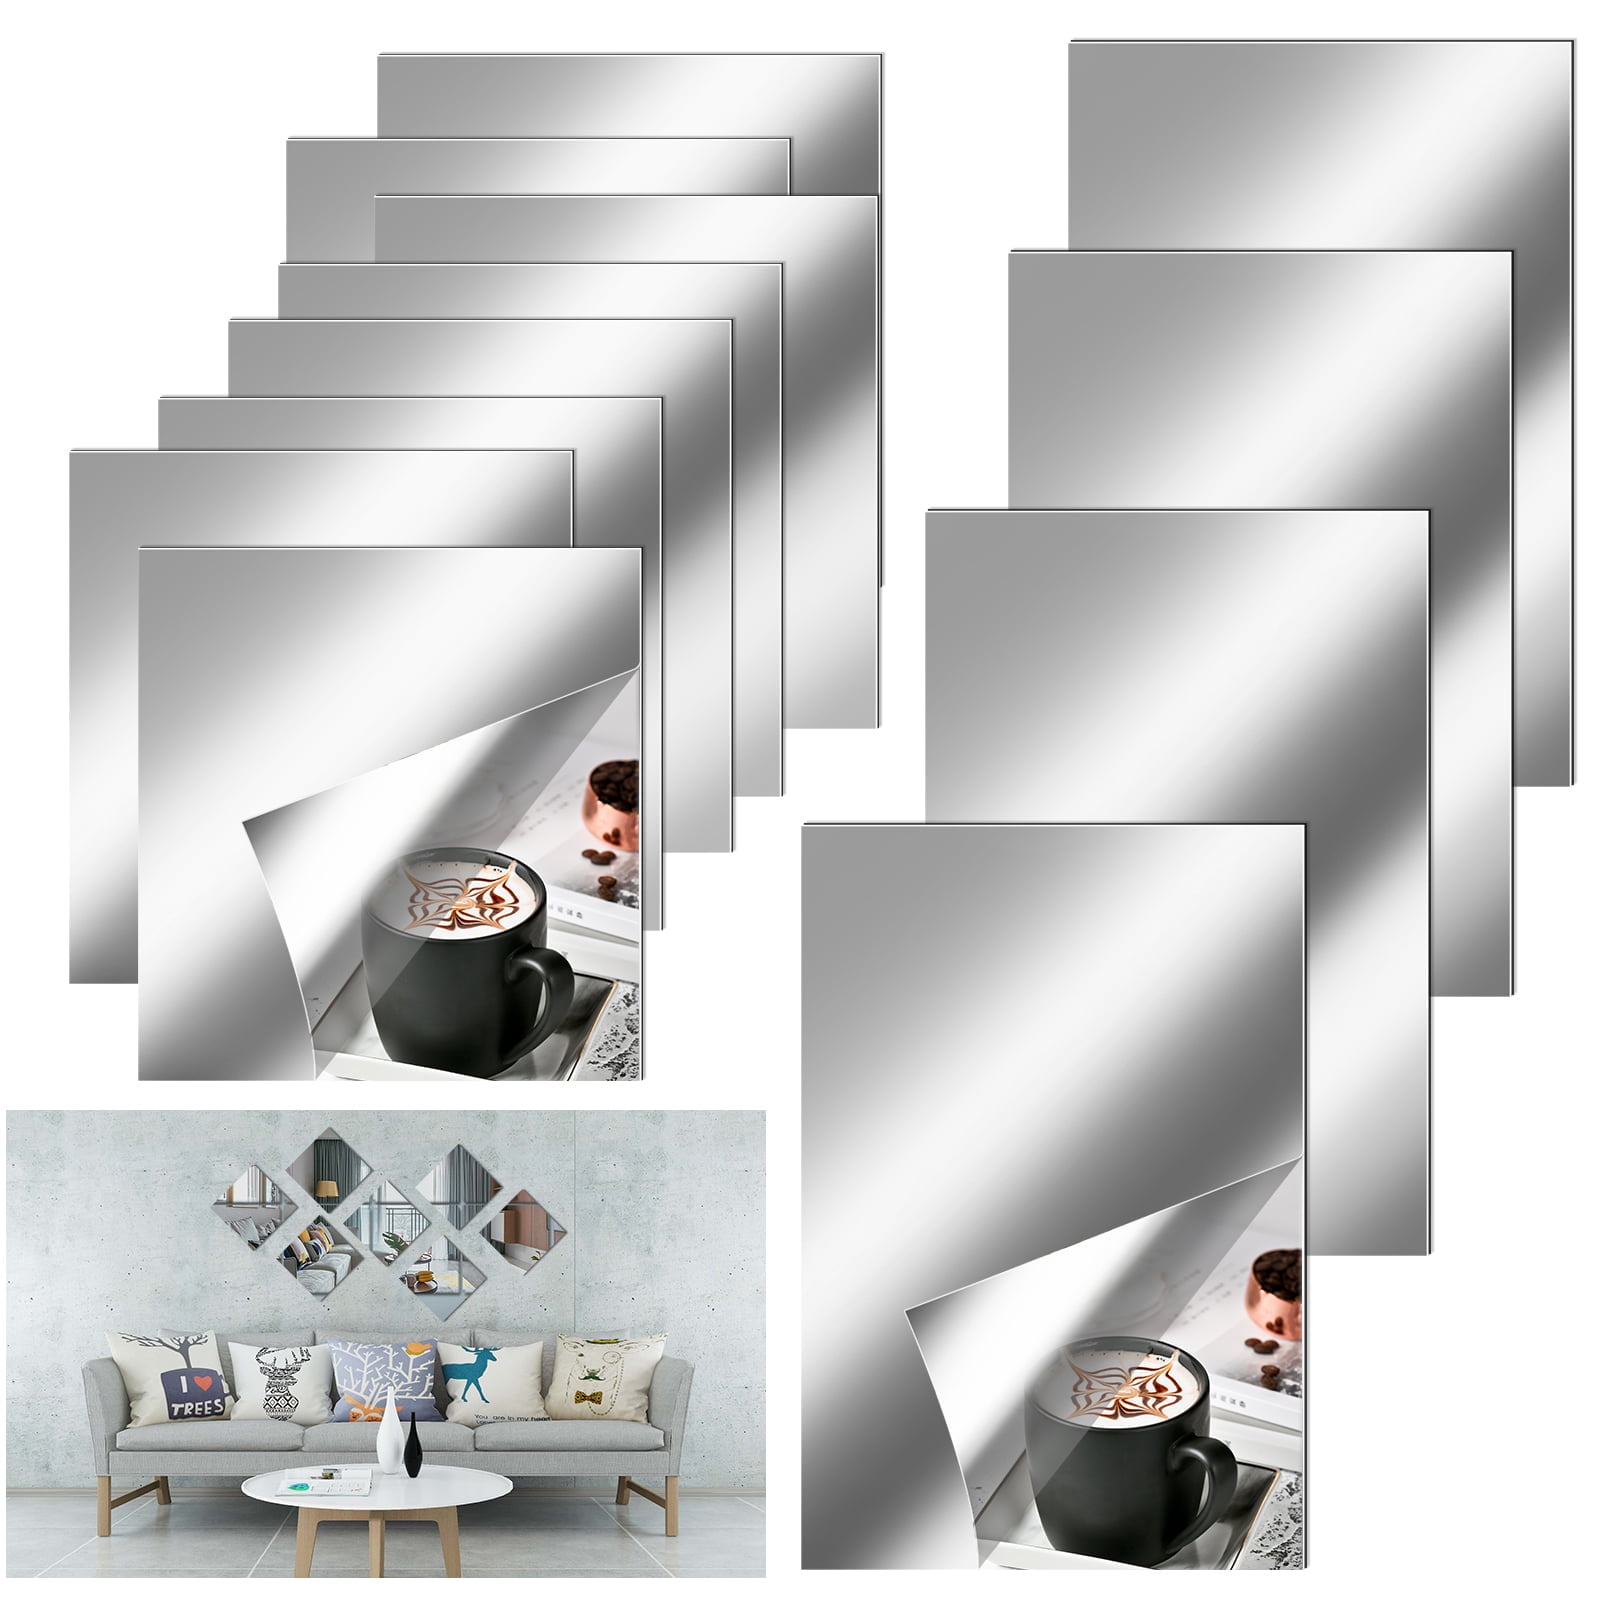 6pcs Flexible Mirror Sheets Self-Adhesive Plastic Mirror Tiles Non-Glass Mirror Wall Stickers for Home Decoration, 6 x 6 Inches, Silver